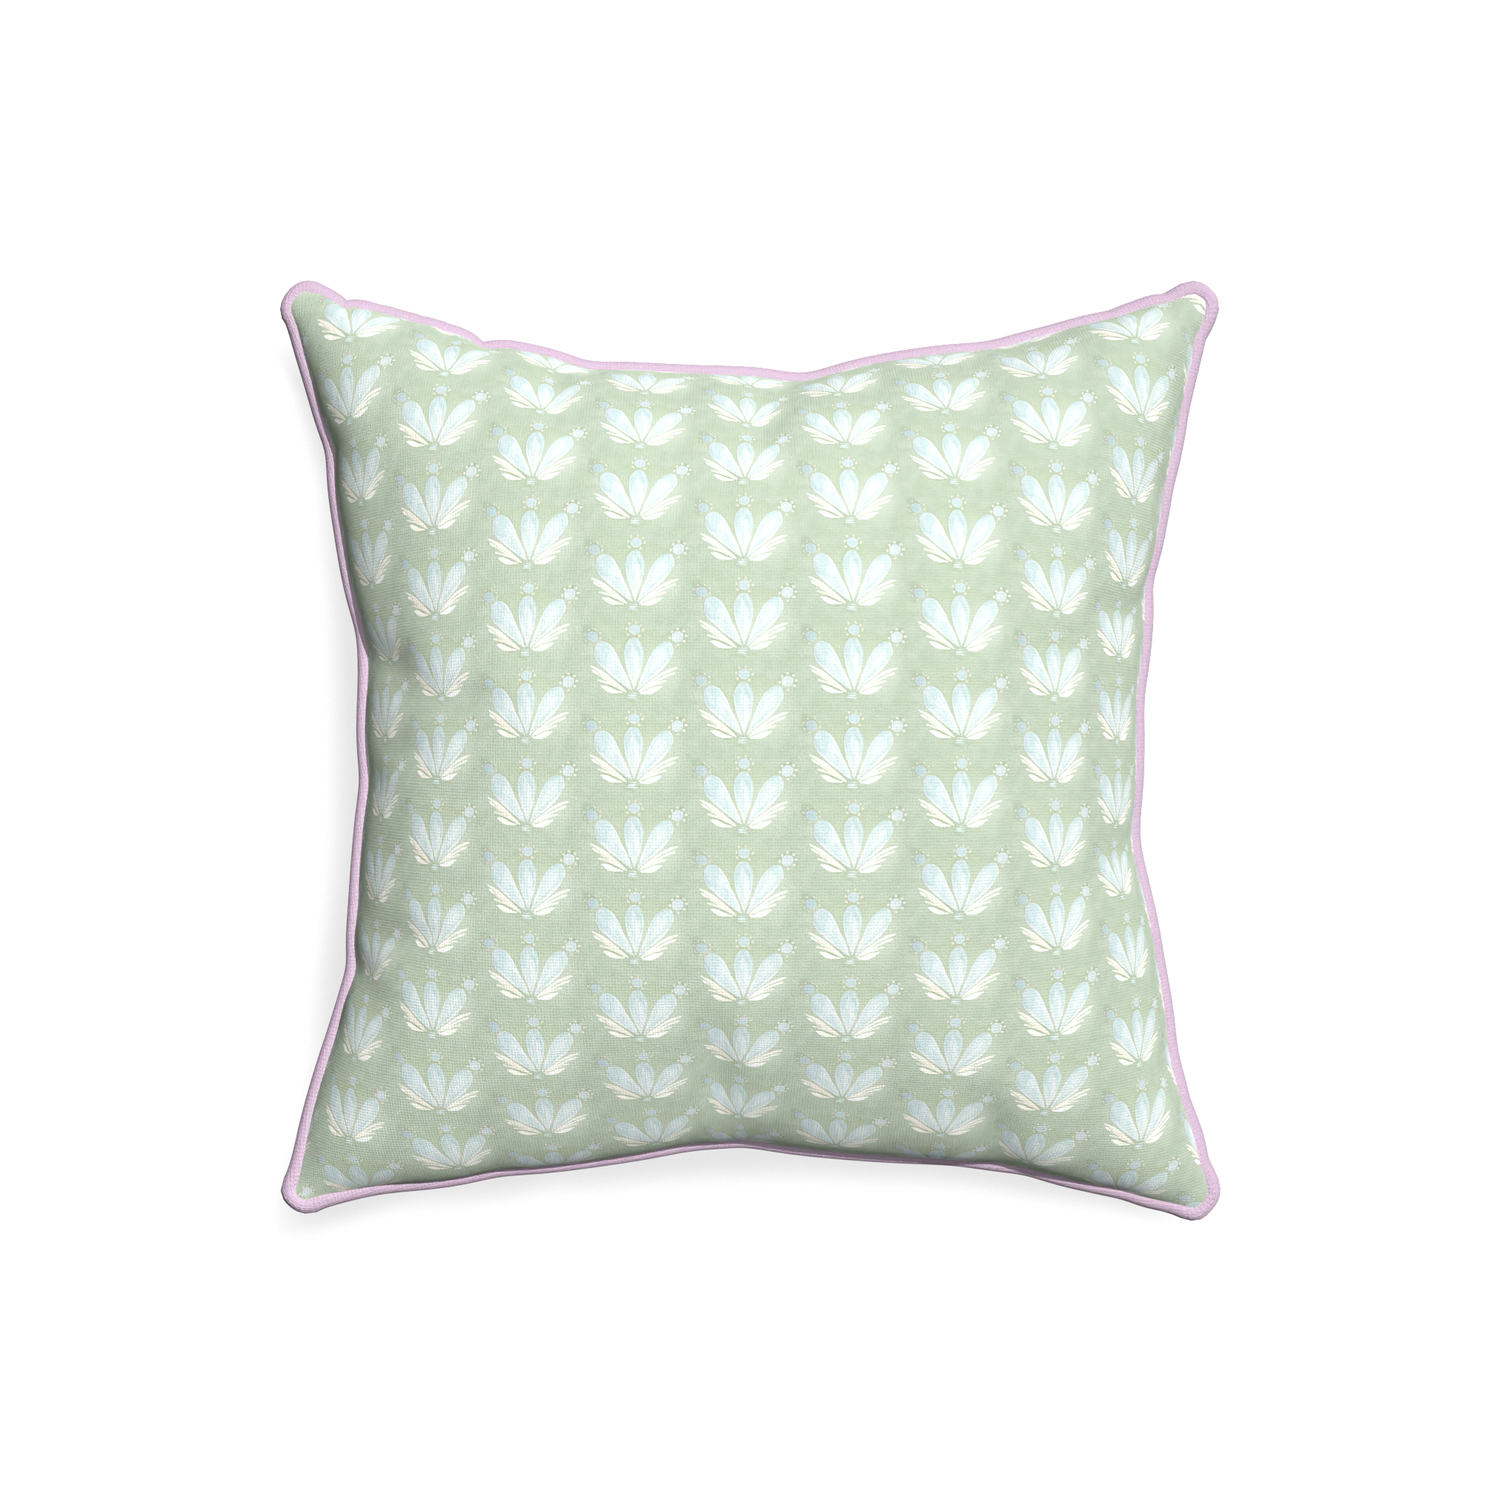 20-square serena sea salt custom blue & green floral drop repeatpillow with l piping on white background